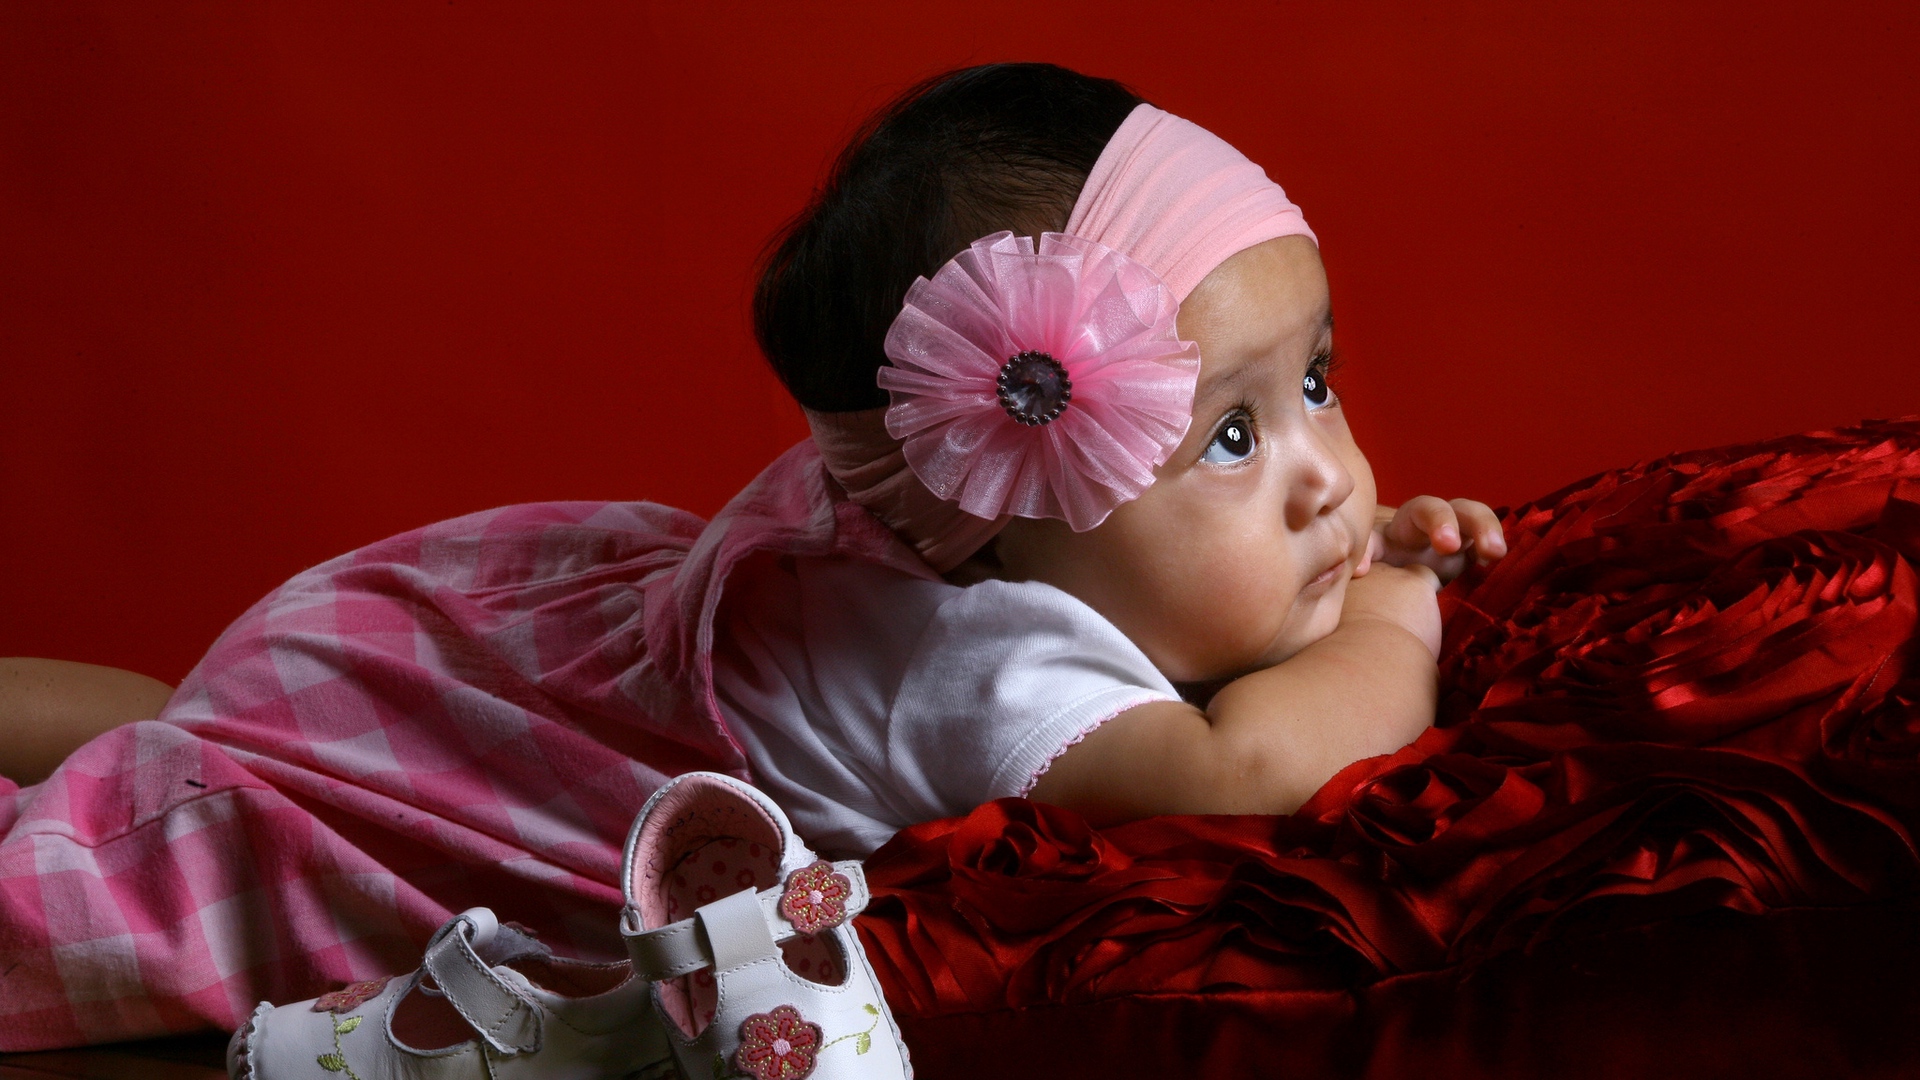 Wallpaper Girl, Shoes, Bandage, Bow Cushion, Baby - Female Baby Images Hd - HD Wallpaper 